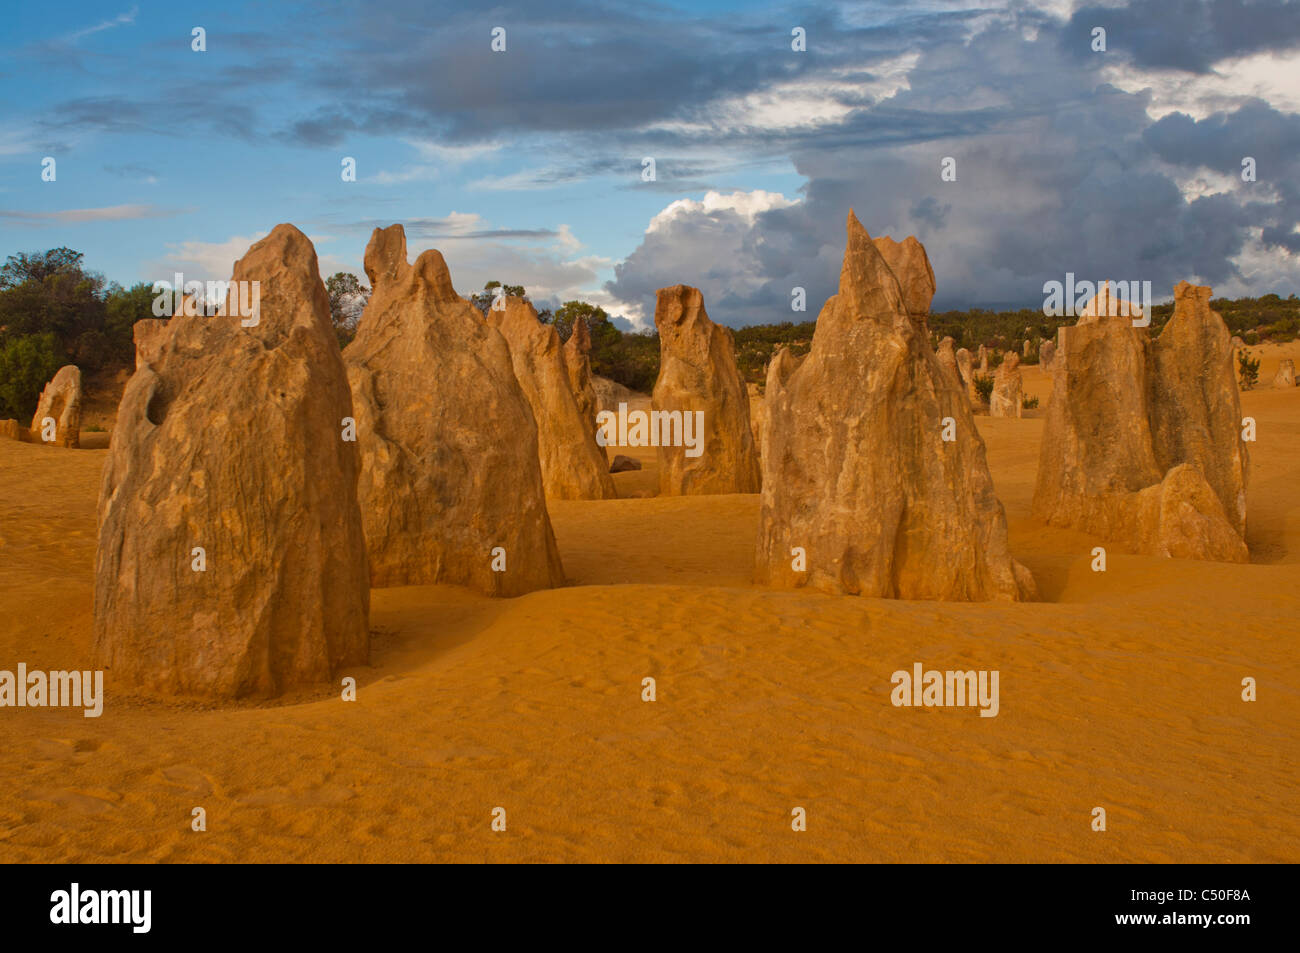 Rock formations in the Pinnacles Desert, Western Australia Stock Photo